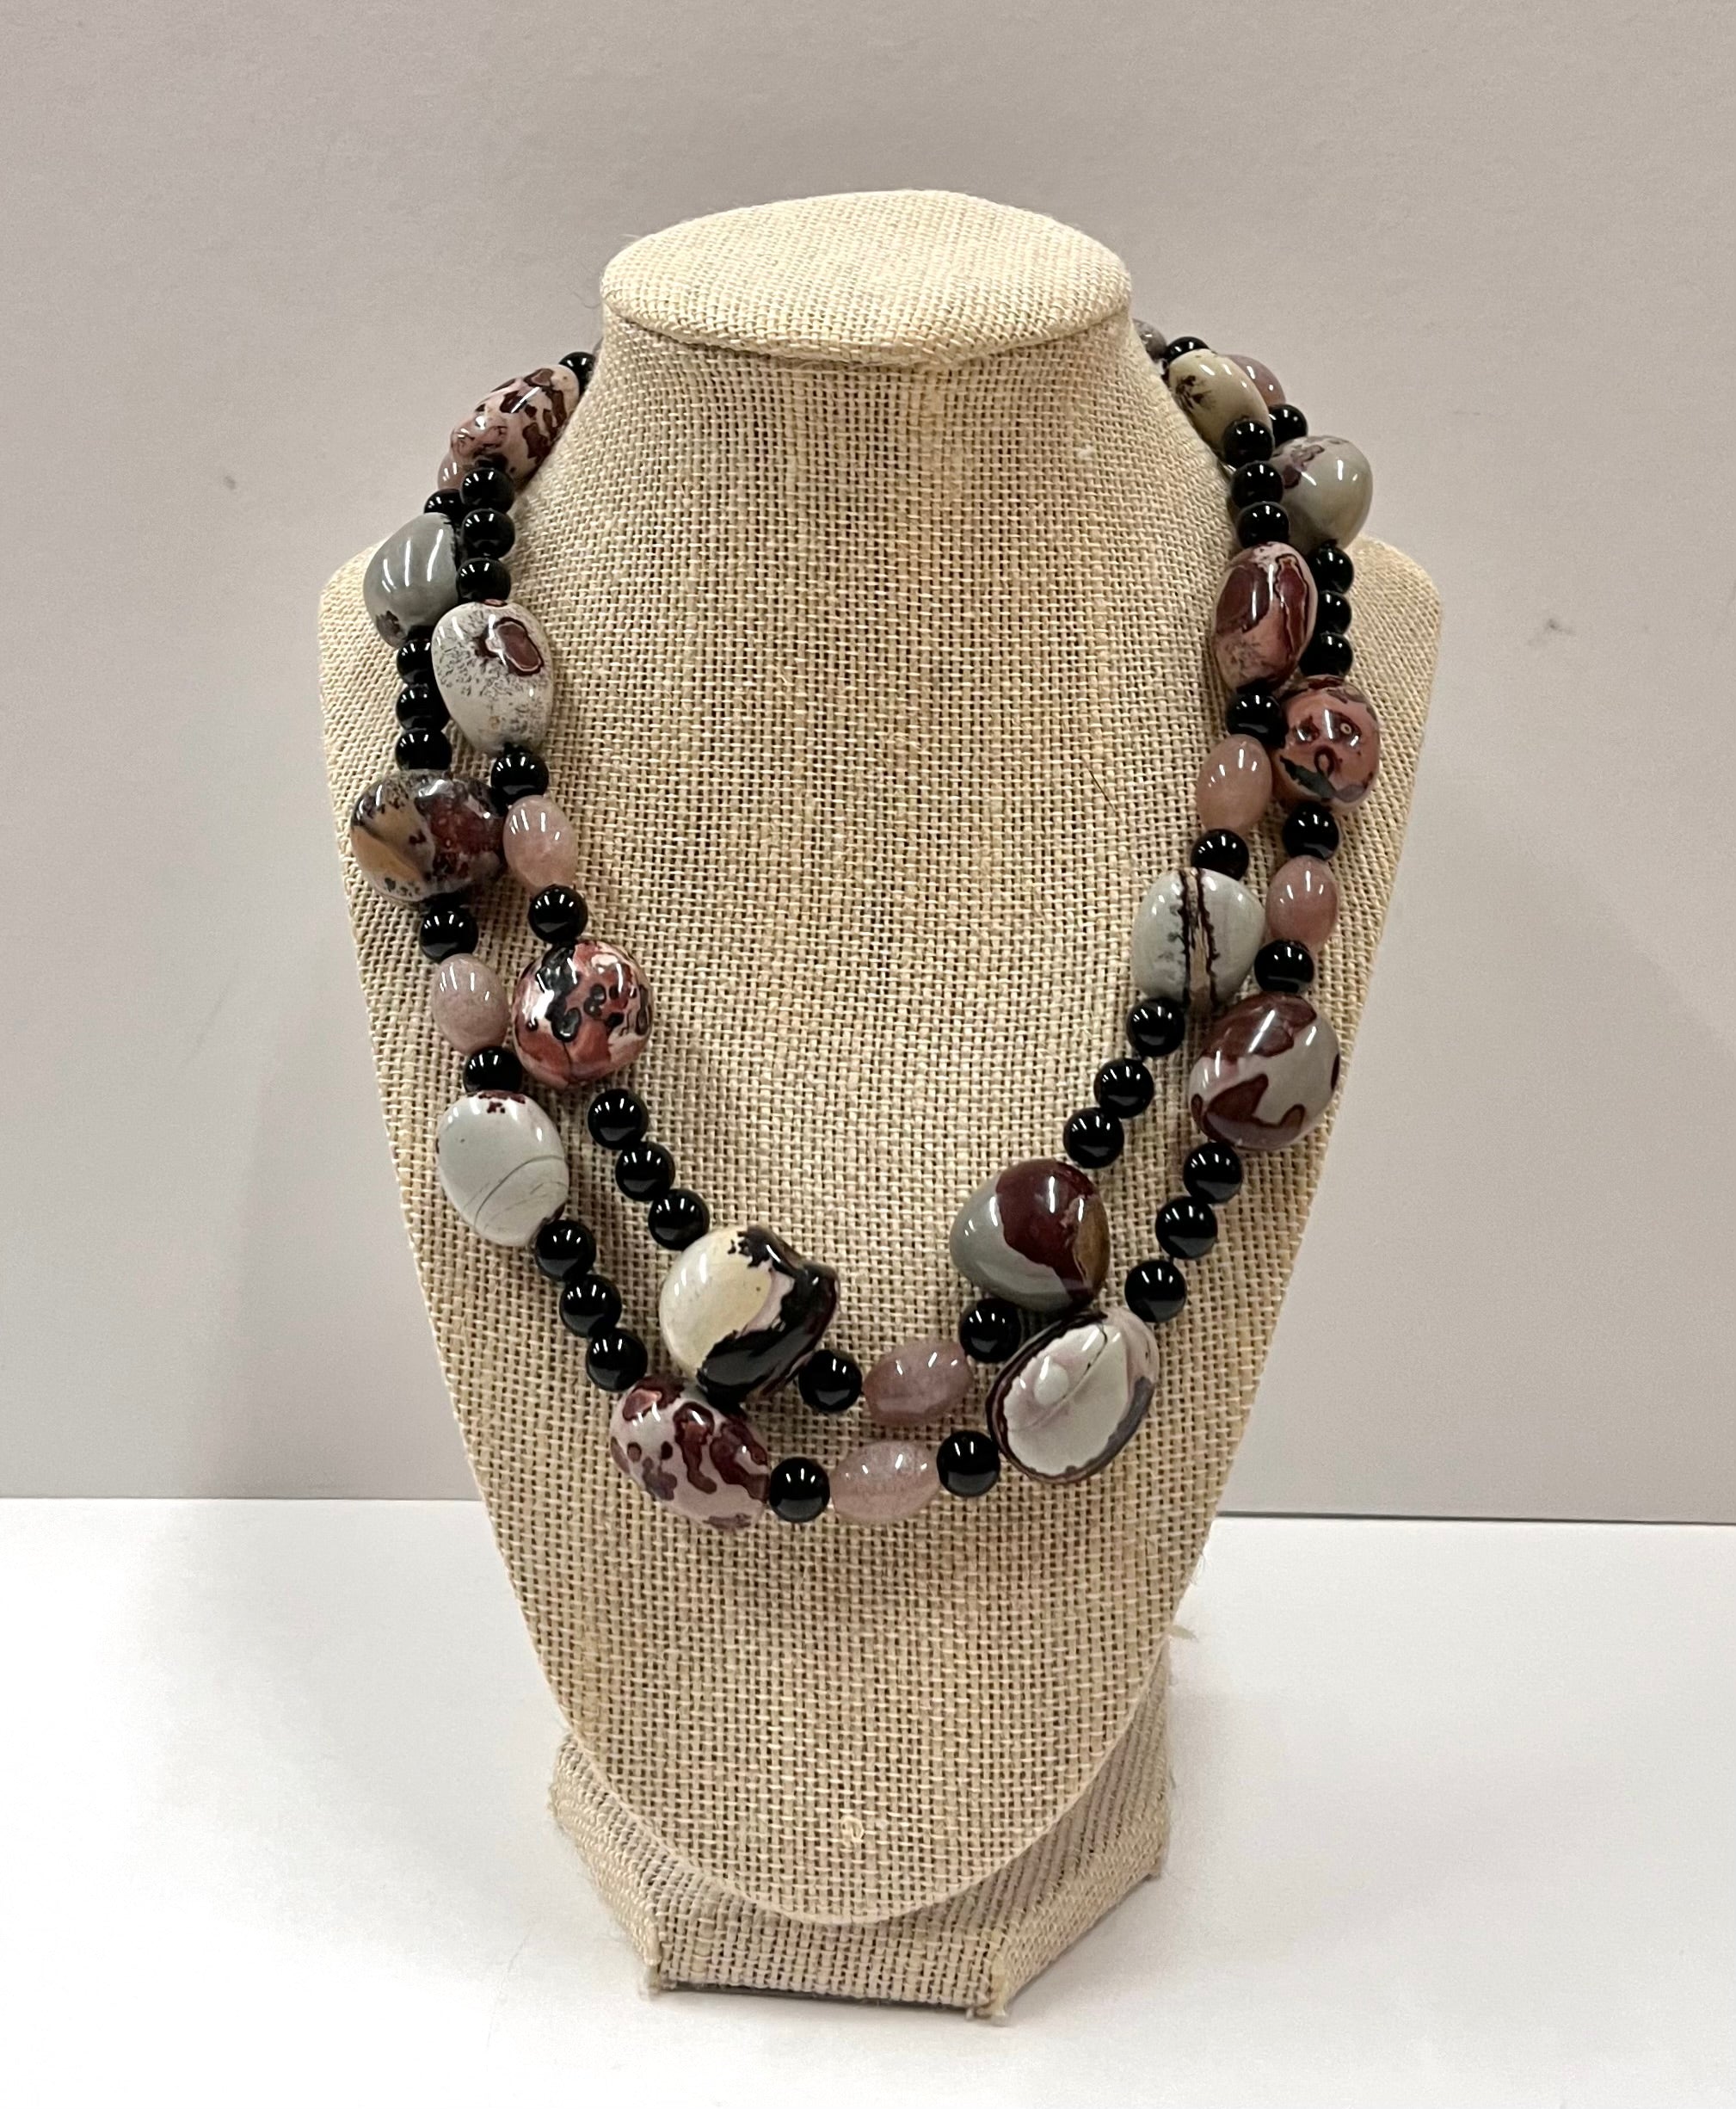 Mixed Stone Beaded Toggle Clasp Necklace